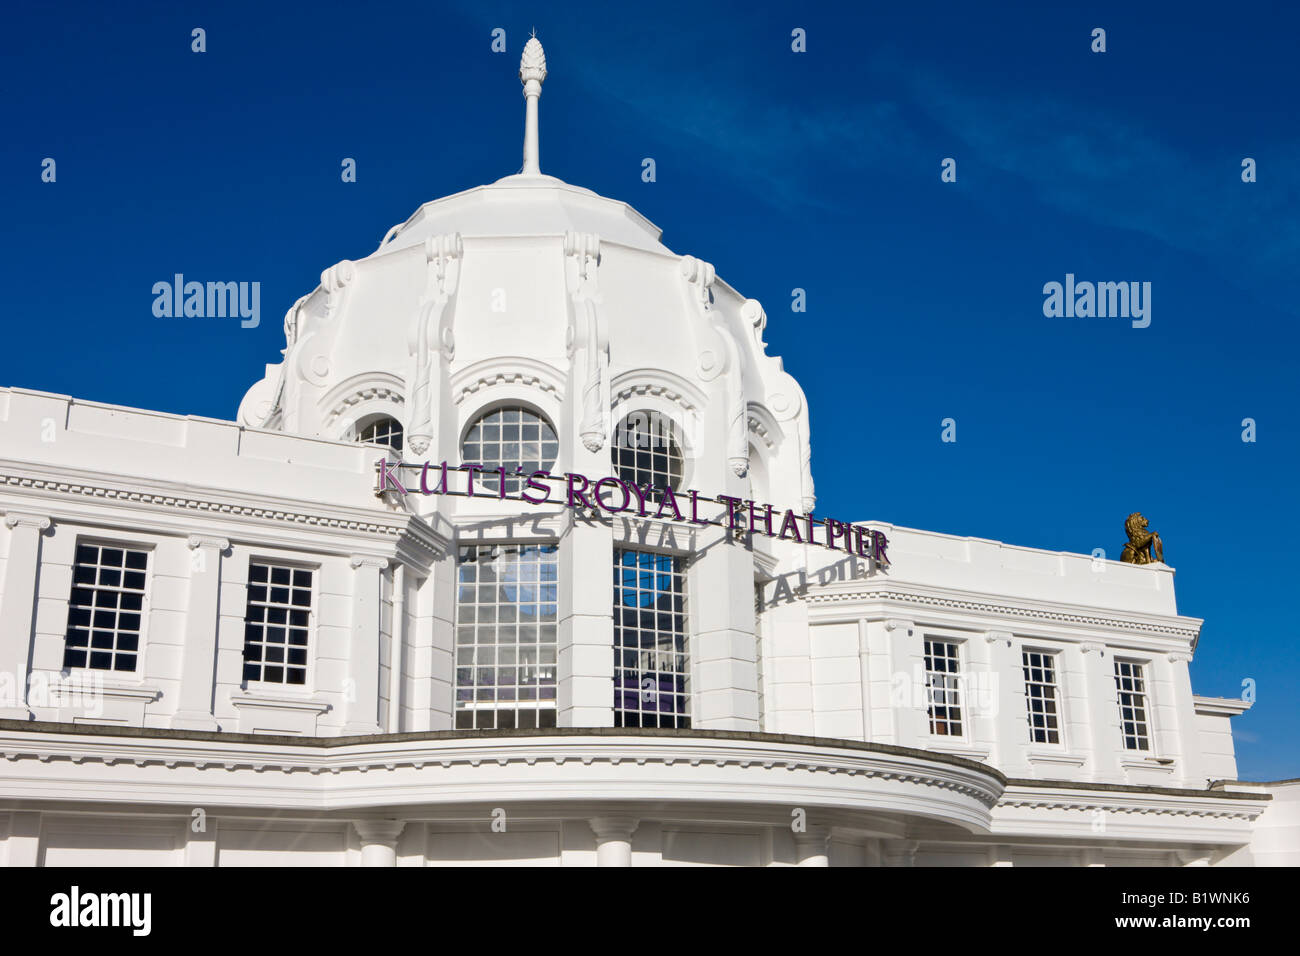 Southamptons Royal Pier now reopened as a Thai restaurant Hampshire England Stock Photo